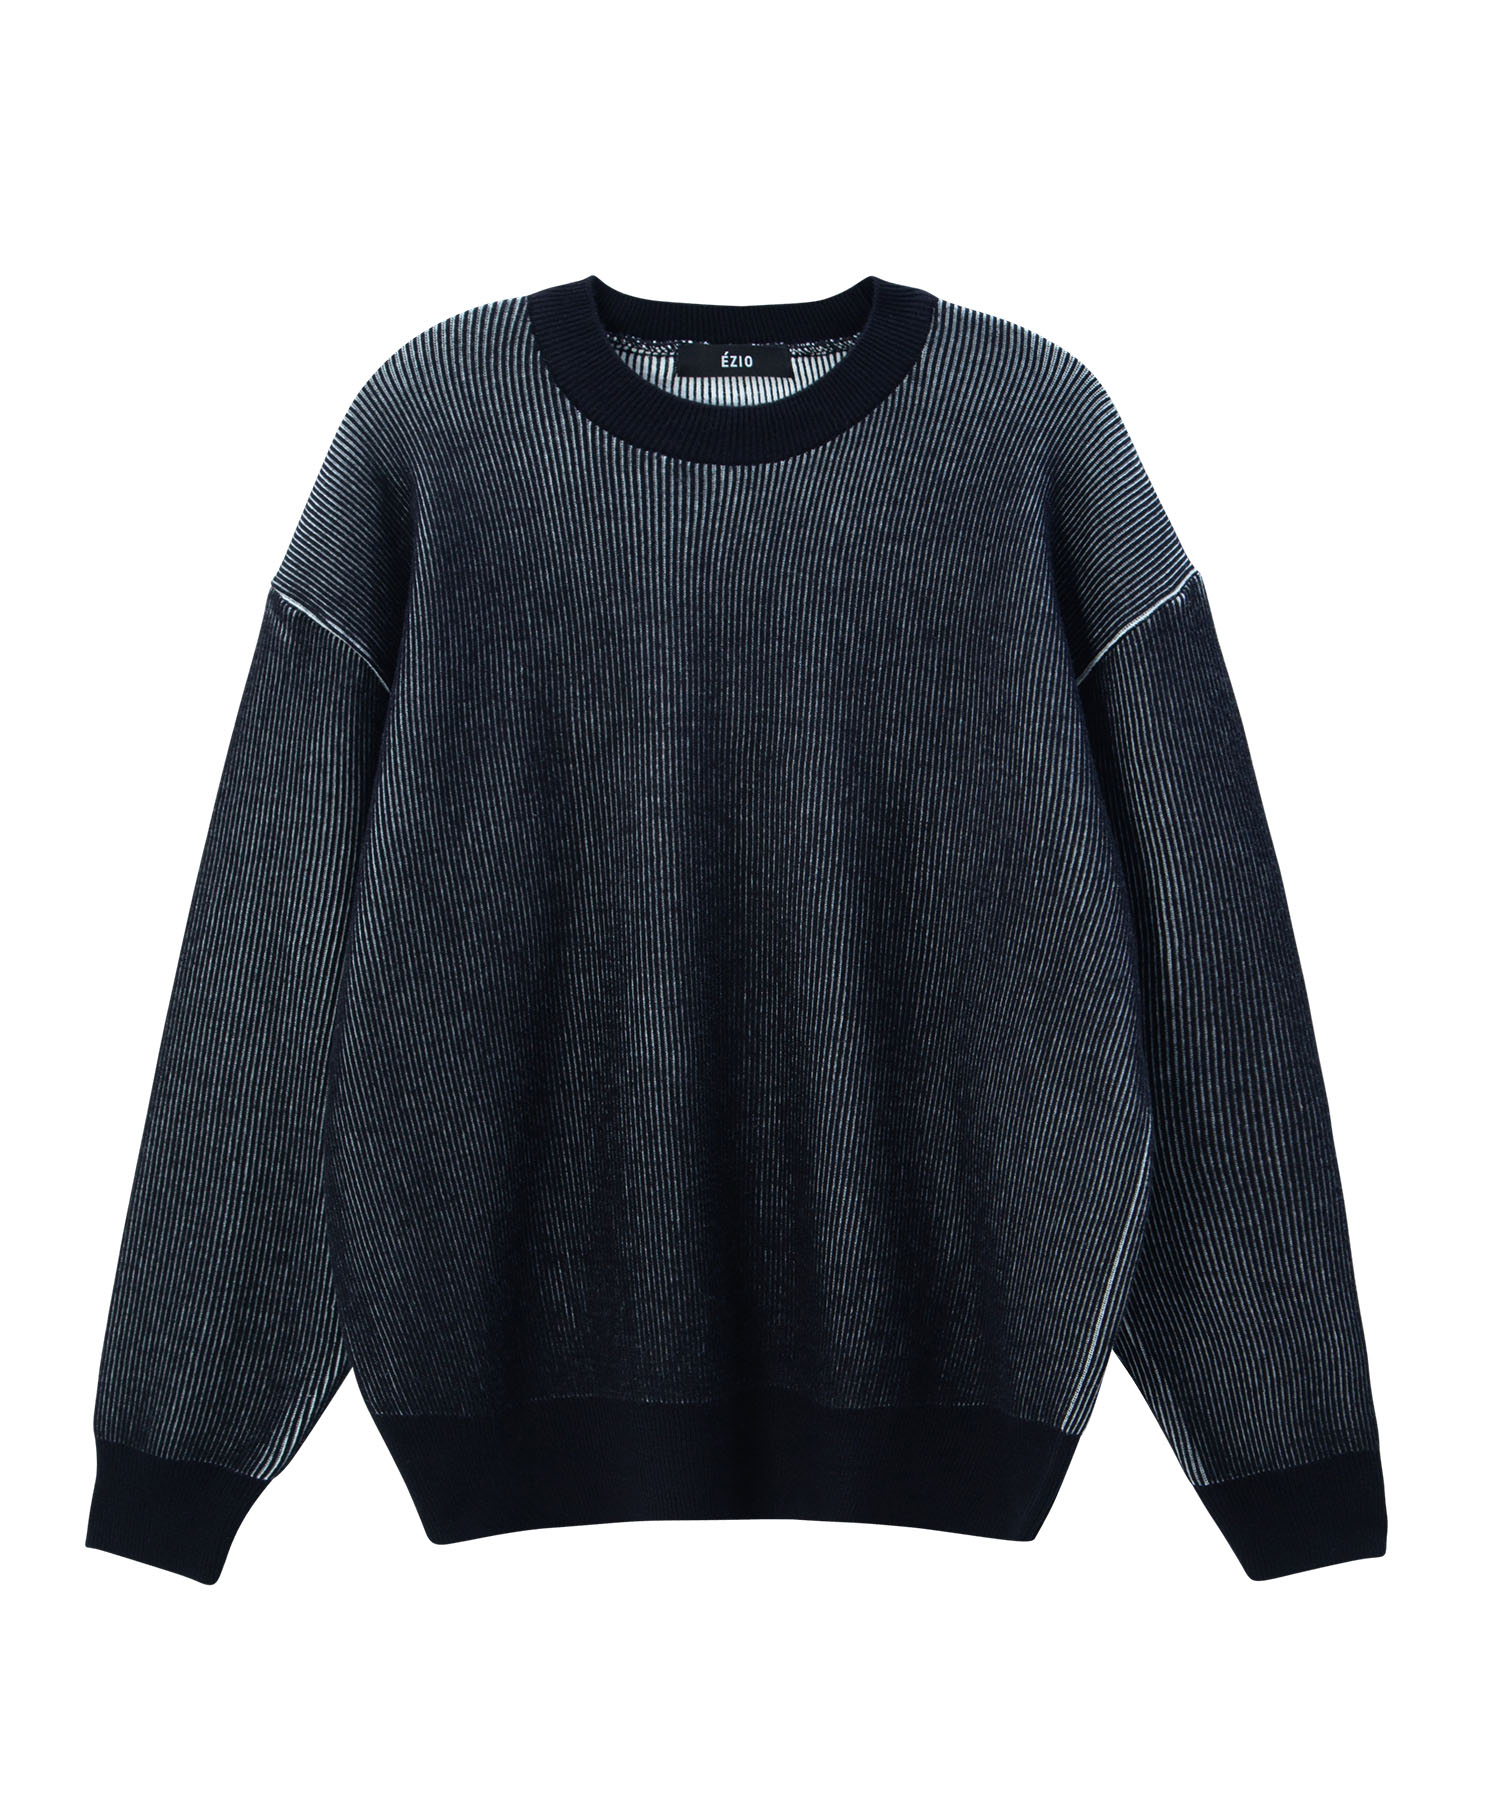 Two Tone Double Face Round Knit Pullover _Black